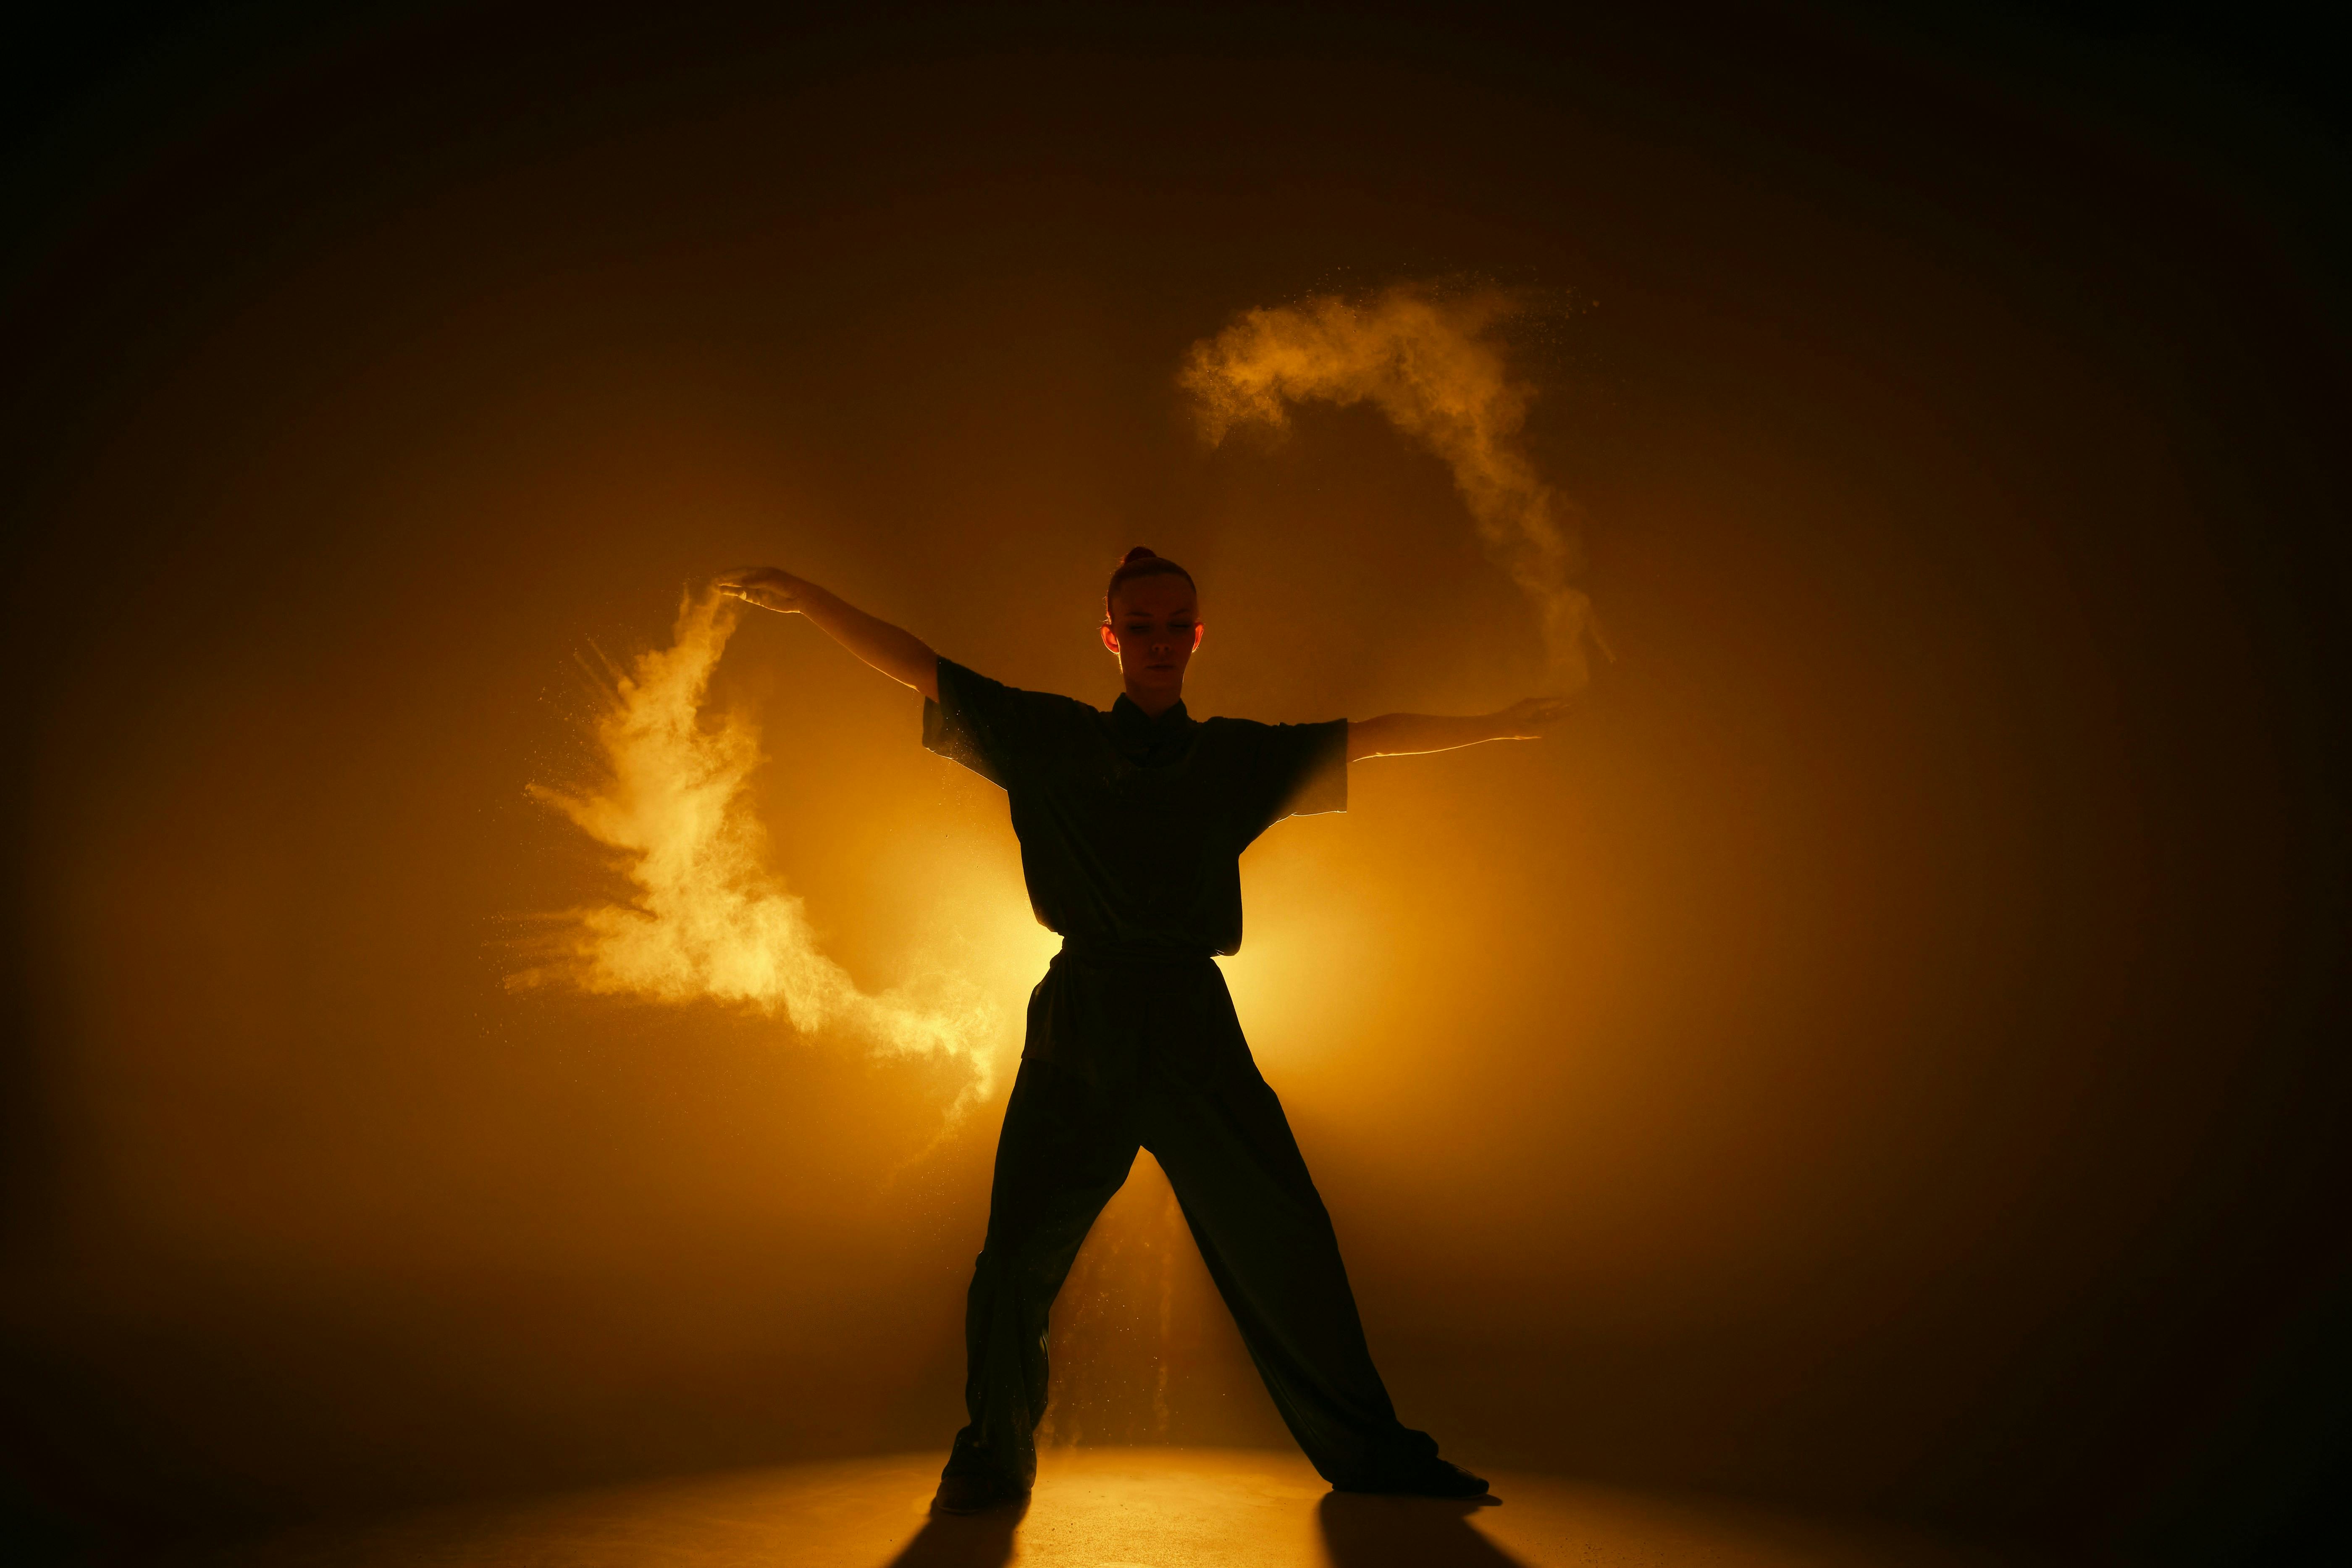 A black silhouette figure standing with arms and legs spread, flinging yellow powder in a ring around themself, backlit in yellow light.